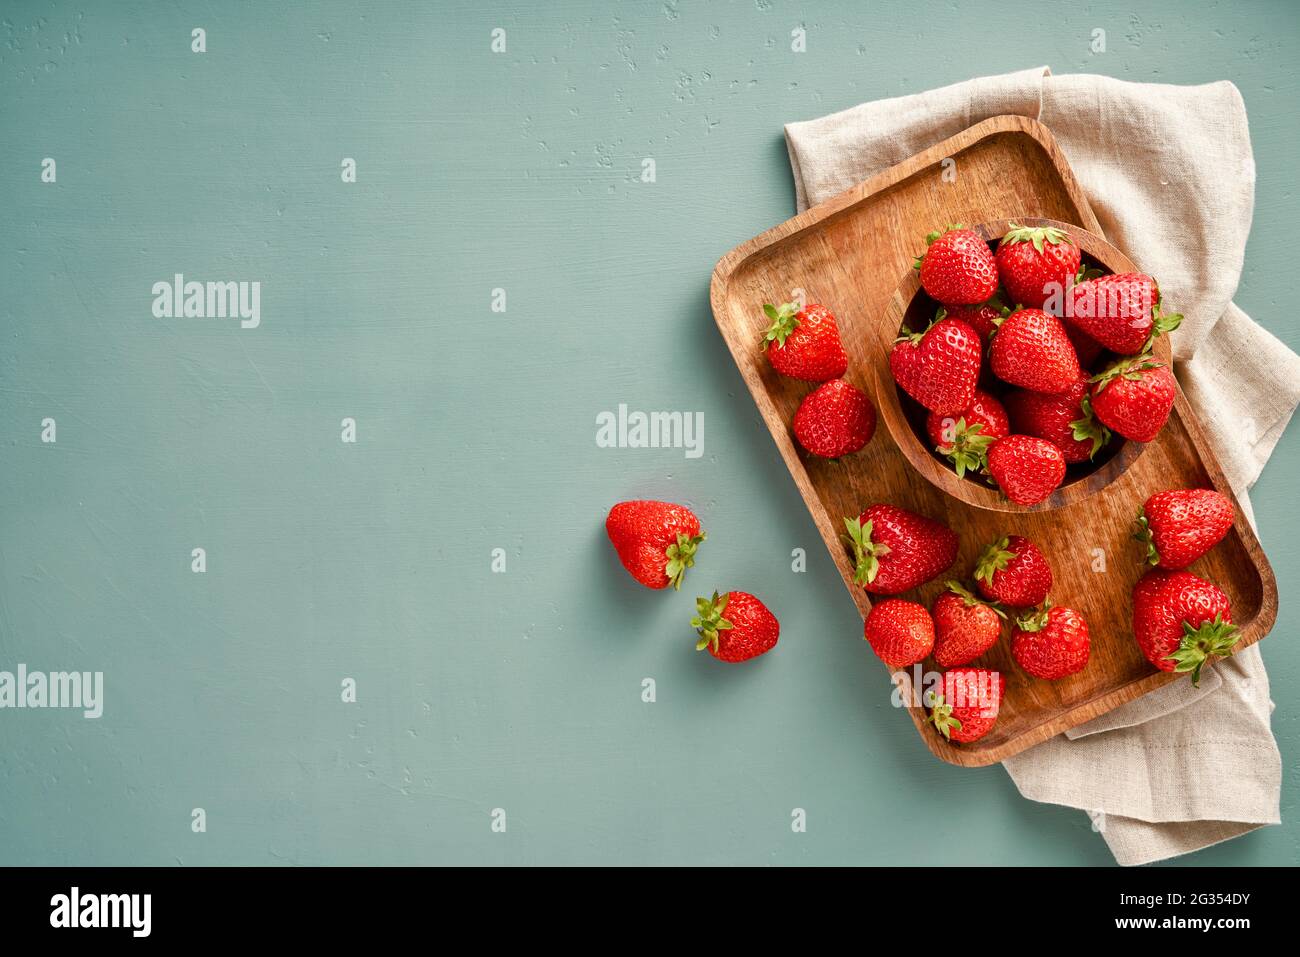 Fresh strawberry on a blue background with copy space. Top view of strawberries with leaves on wooden plate. Stock Photo